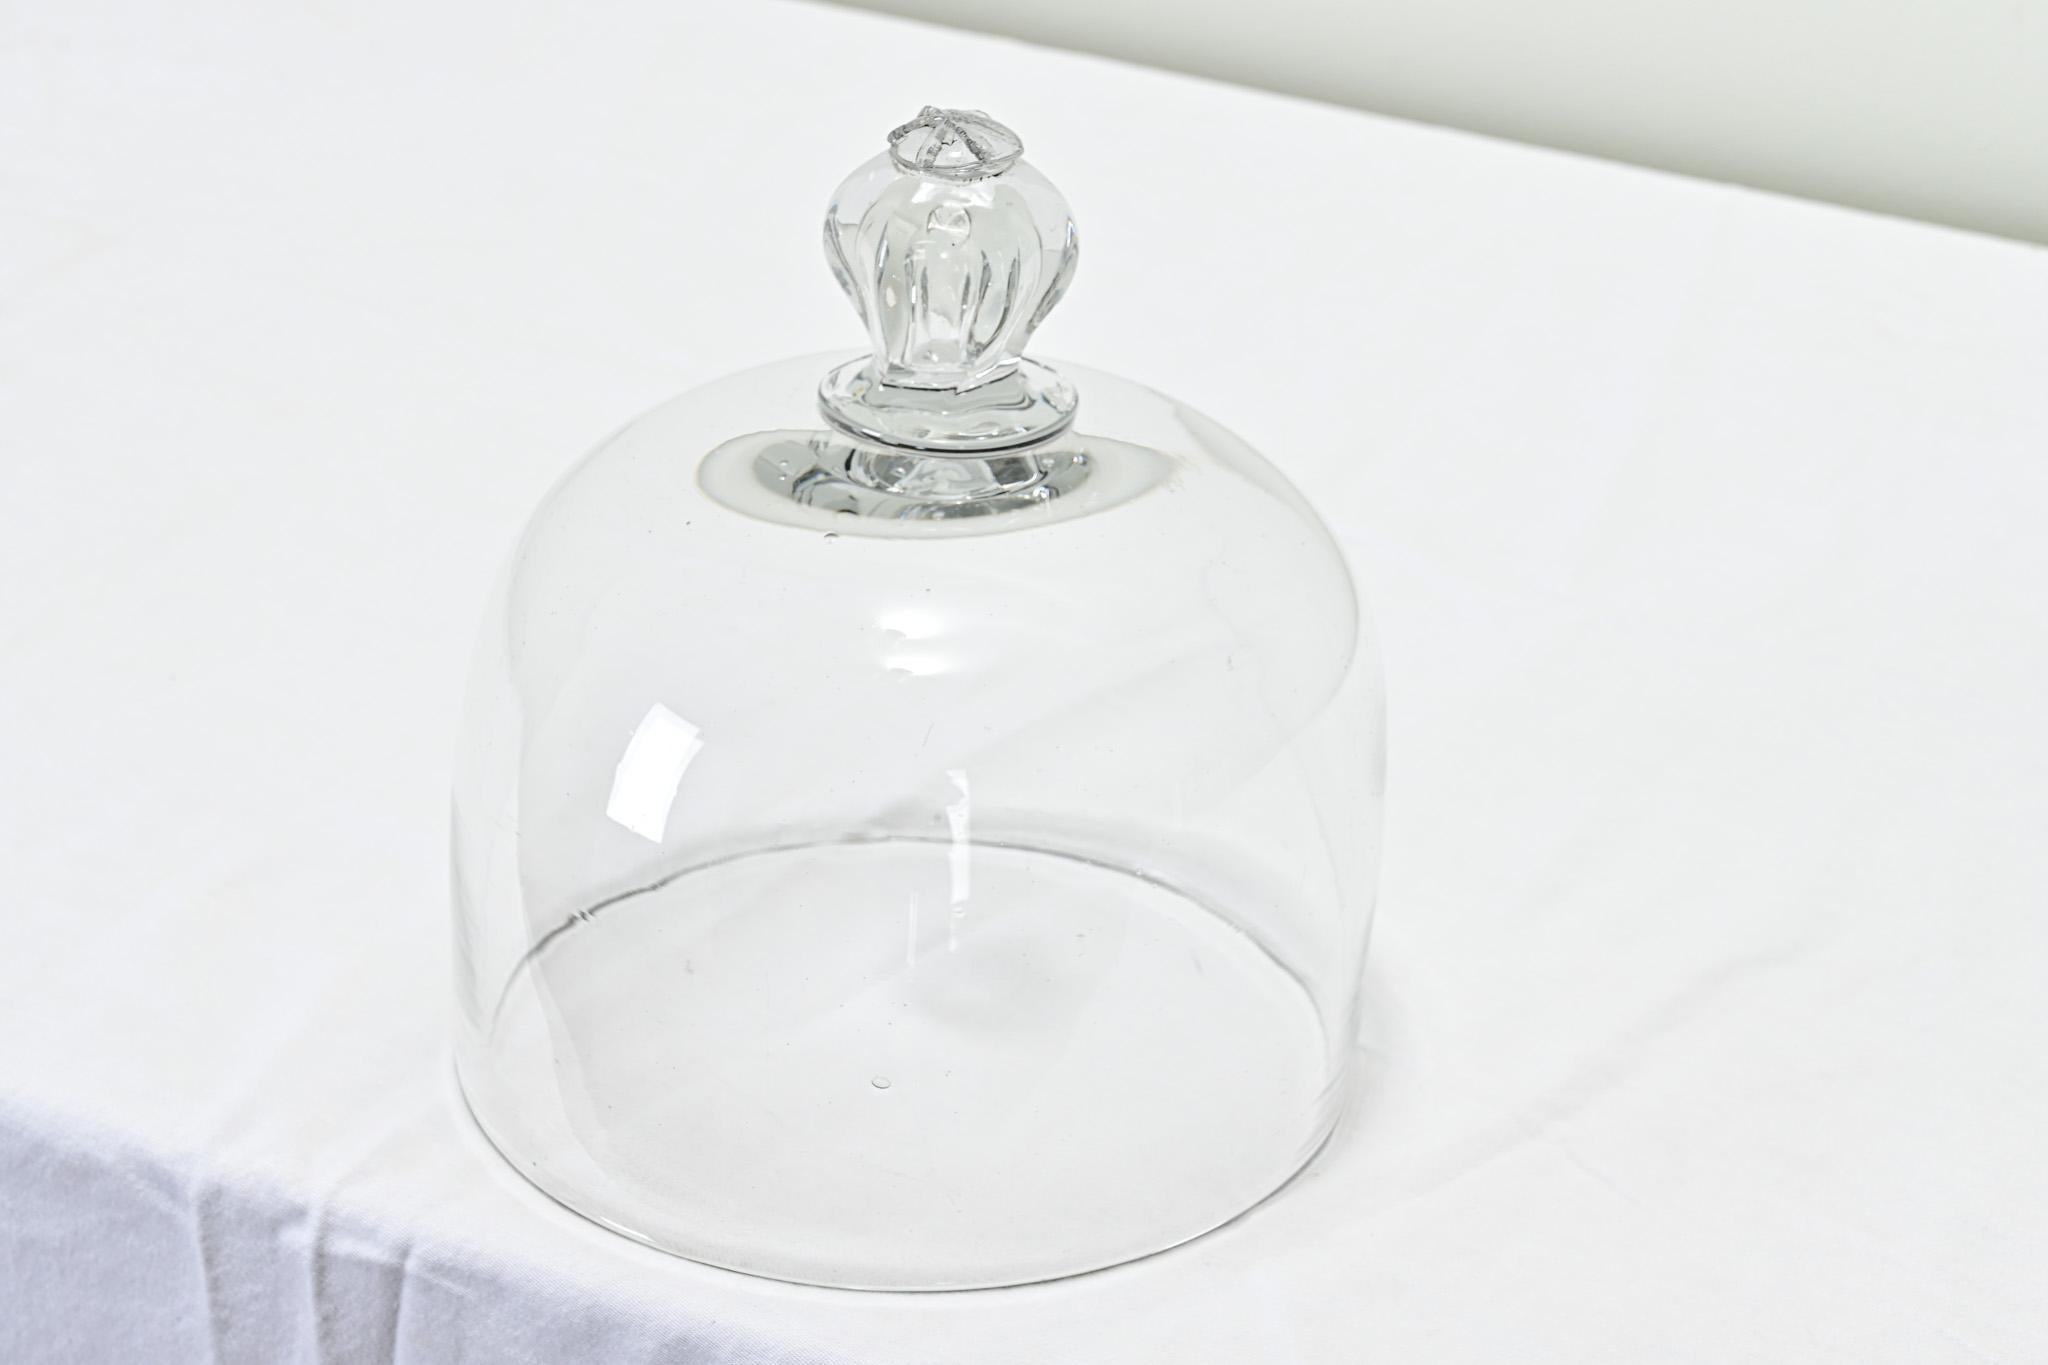 A French hand blown dome used for covering cheese or pastries, most likely for display in a mercantile shop. This cloche has a decorative blown glass knob. Be sure to view the detailed images of this culinary antique.